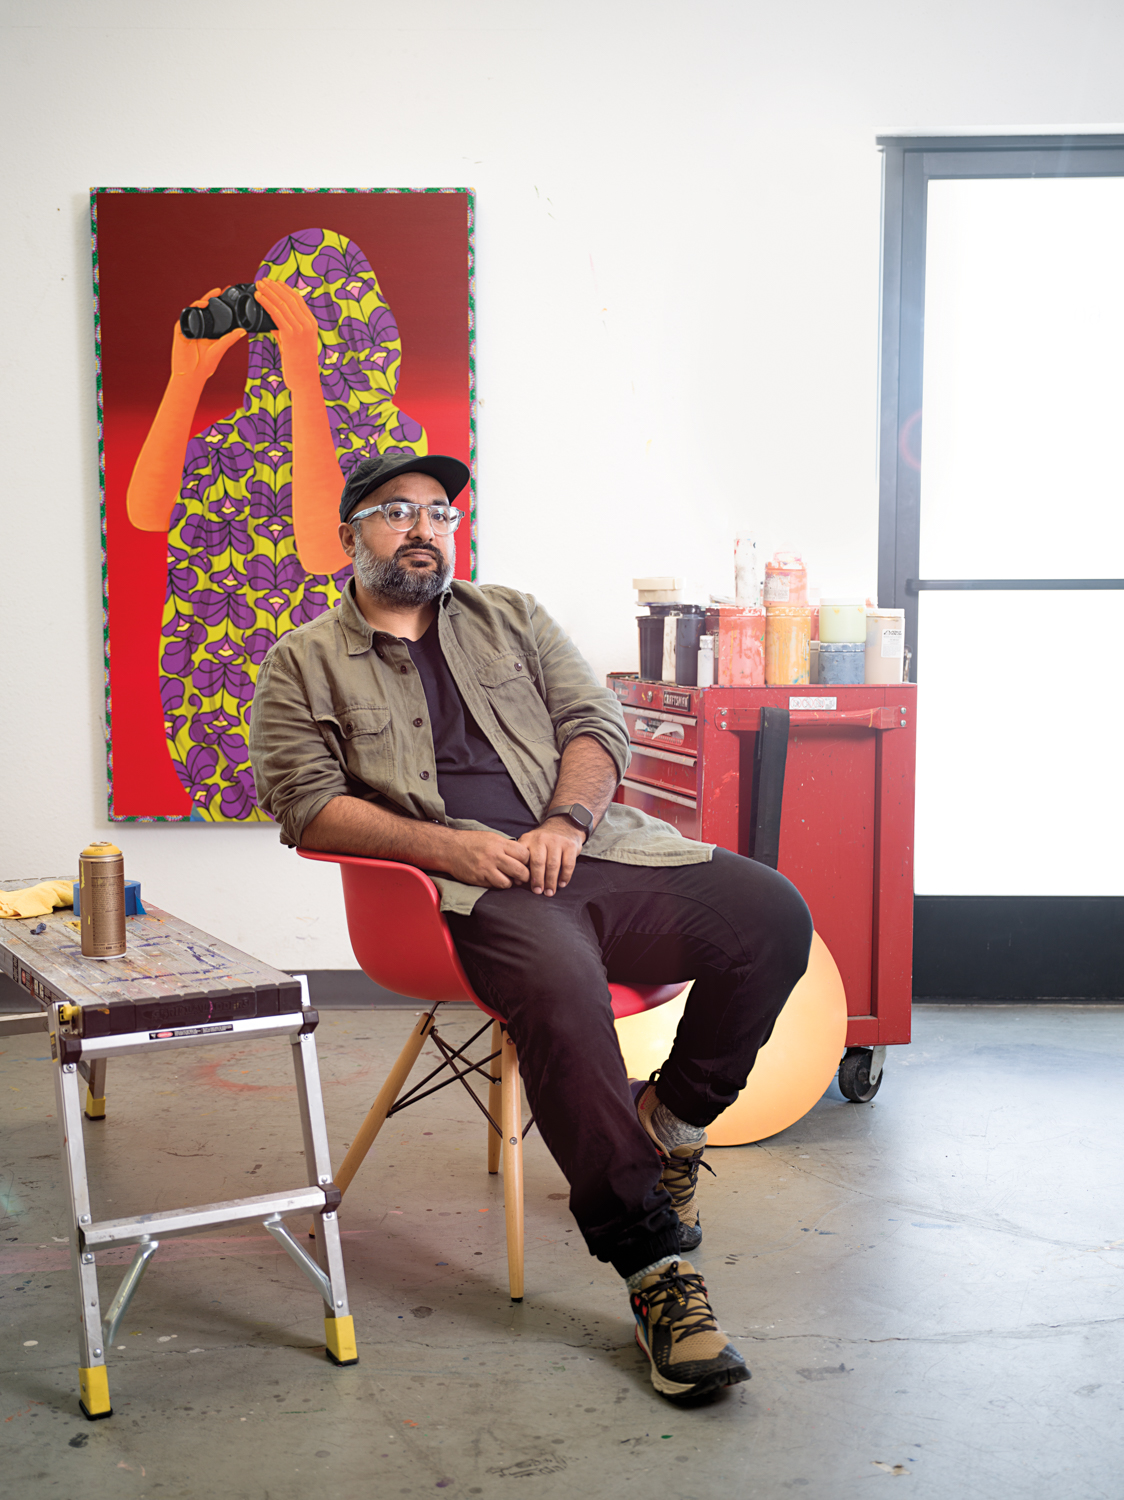 Themes Of Culture And Identity Fill This L.A. Artist’s Vibrant Works